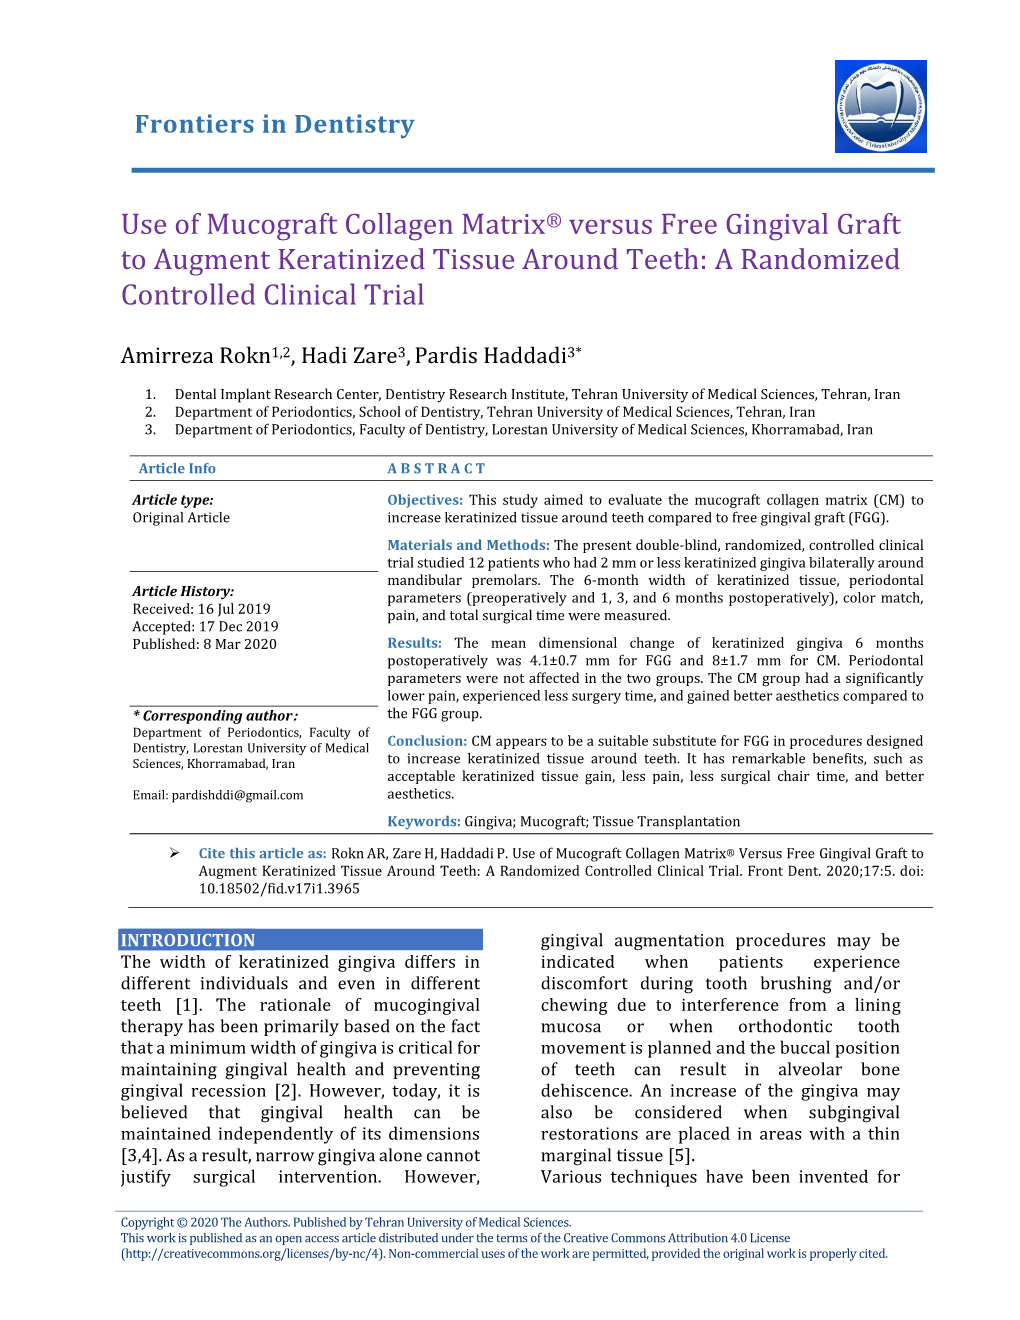 Use of Mucograft Collagen Matrix® Versus Free Gingival Graft to Augment Keratinized Tissue Around Teeth: a Randomized Controlled Clinical Trial